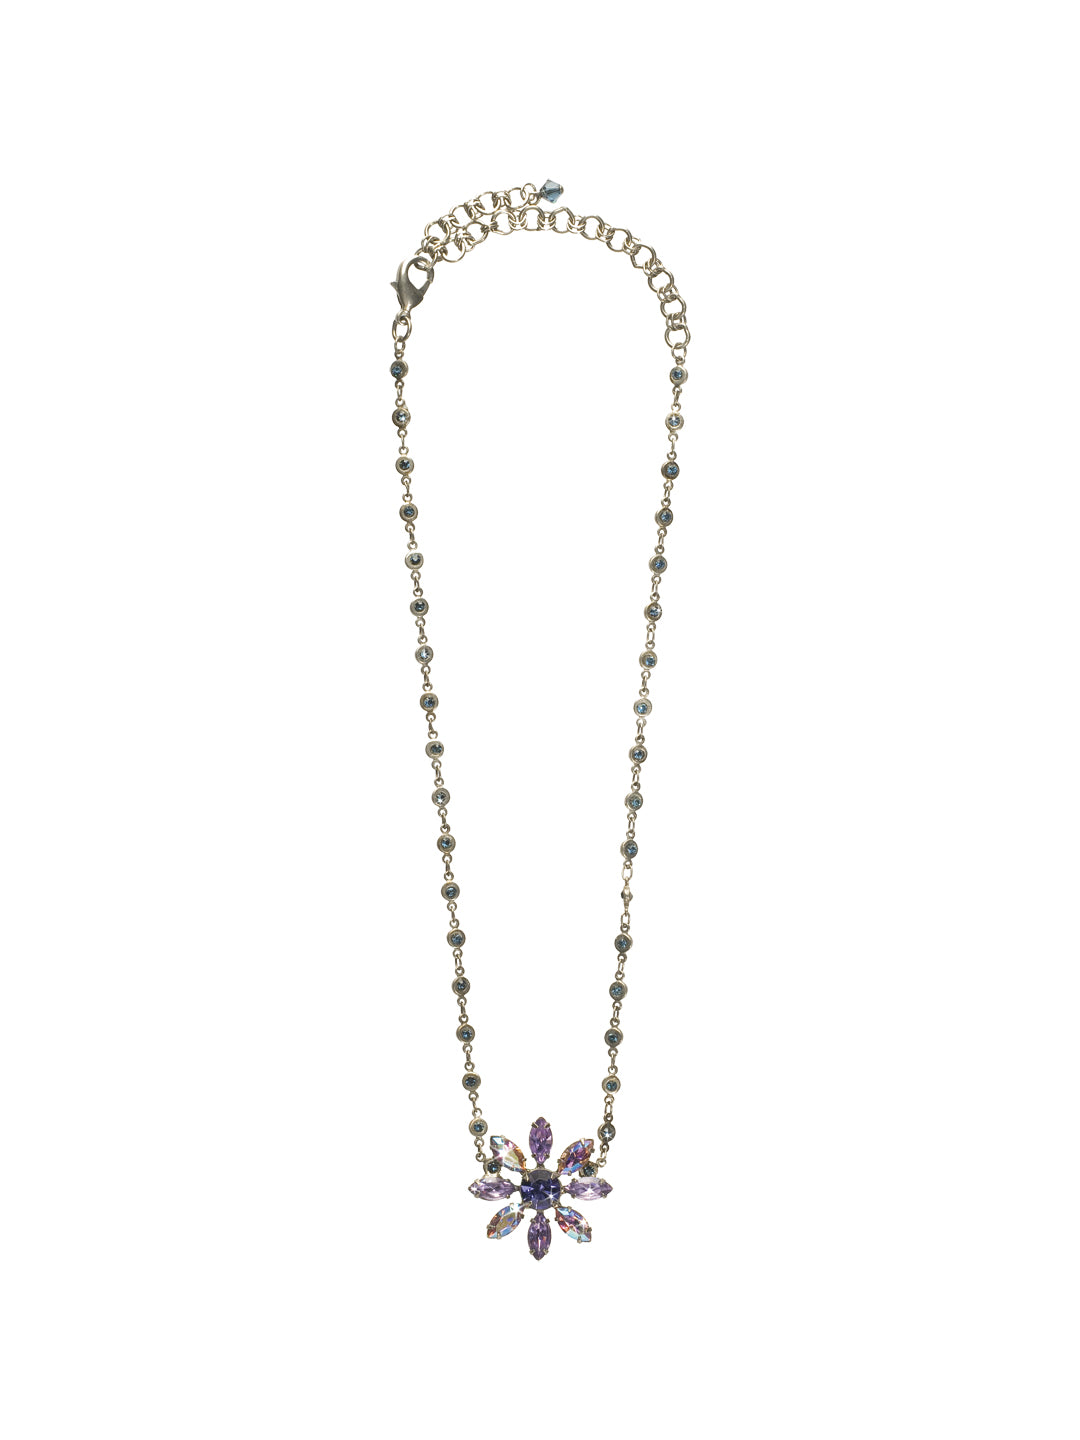 Petite Crystal Flower Pendant - NBP116ASHY - Sparkle in full bloom! This crystal flower pendant will add sparkle and radiance to your every day. From Sorrelli's Hydrangea collection in our Antique Silver-tone finish.